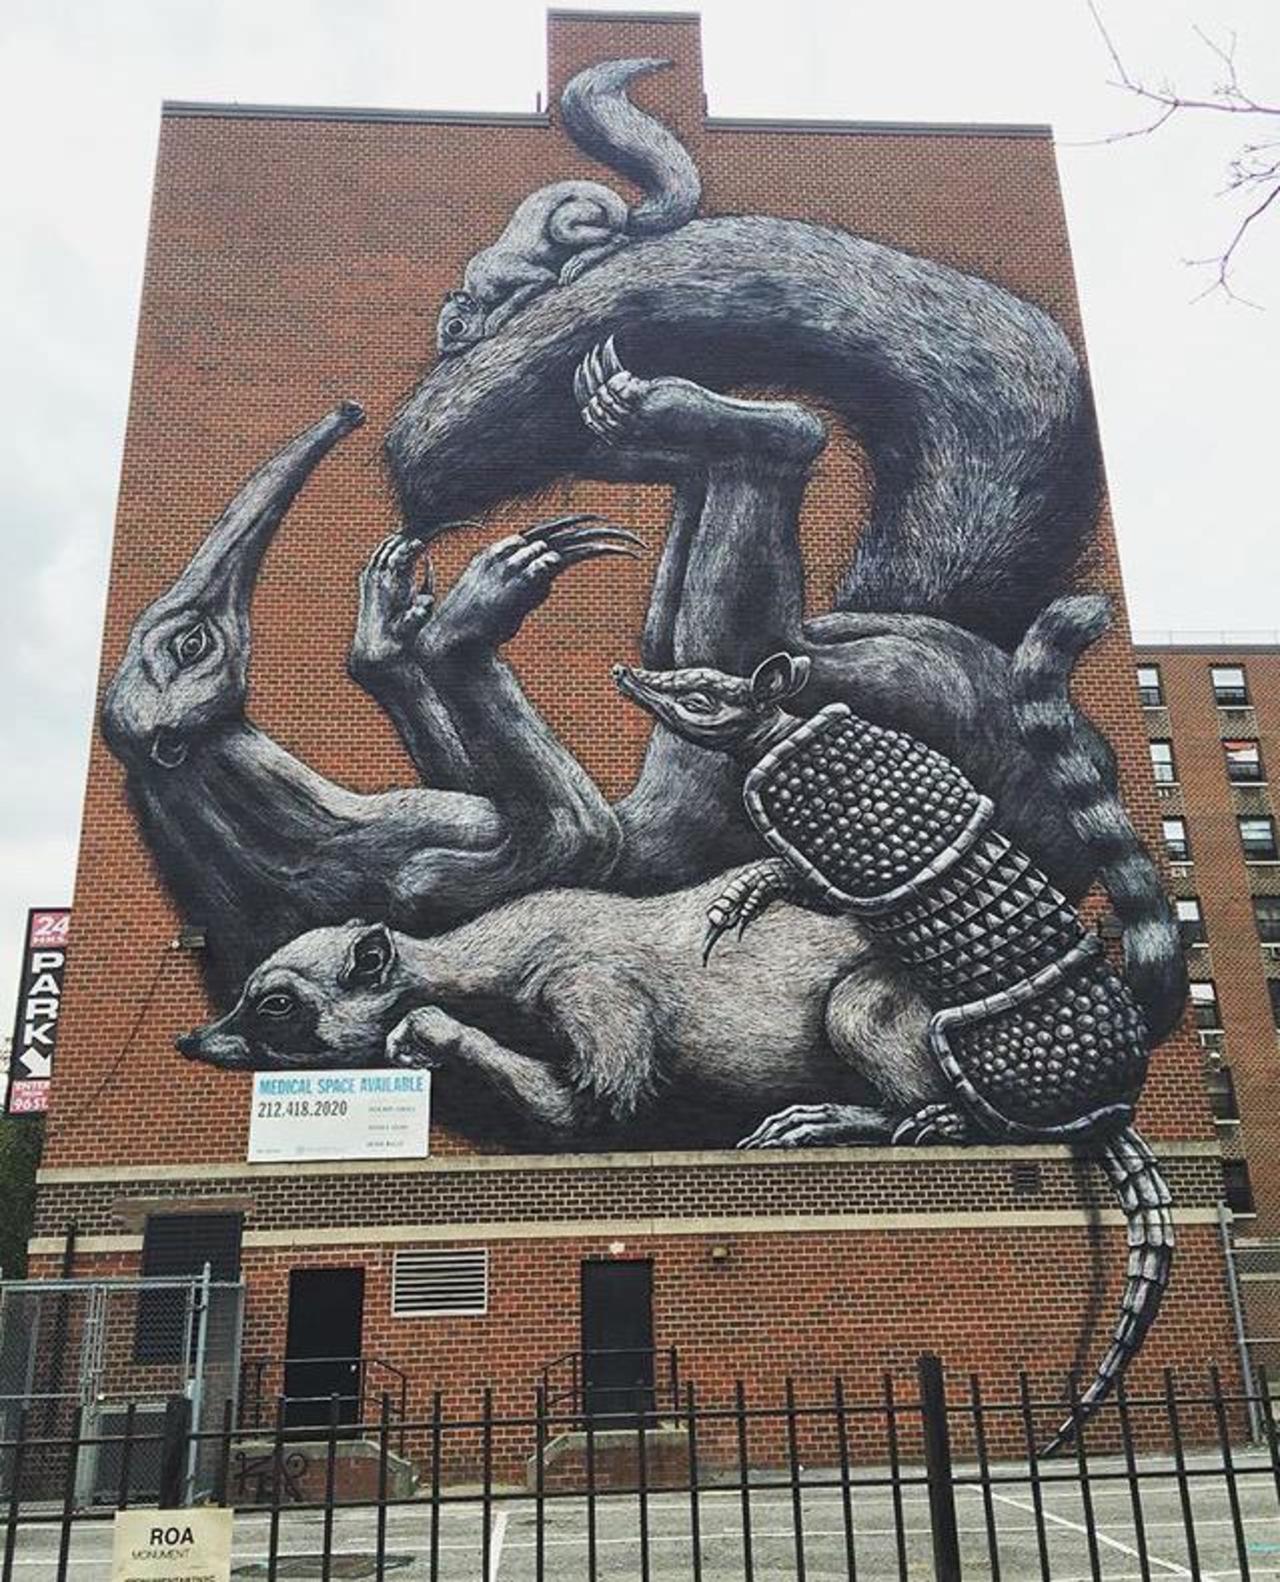 The completed new large scale Street Art wall by ROA in NYC

#art #graffiti #mural #streetart http://t.co/xQBCWcJudB